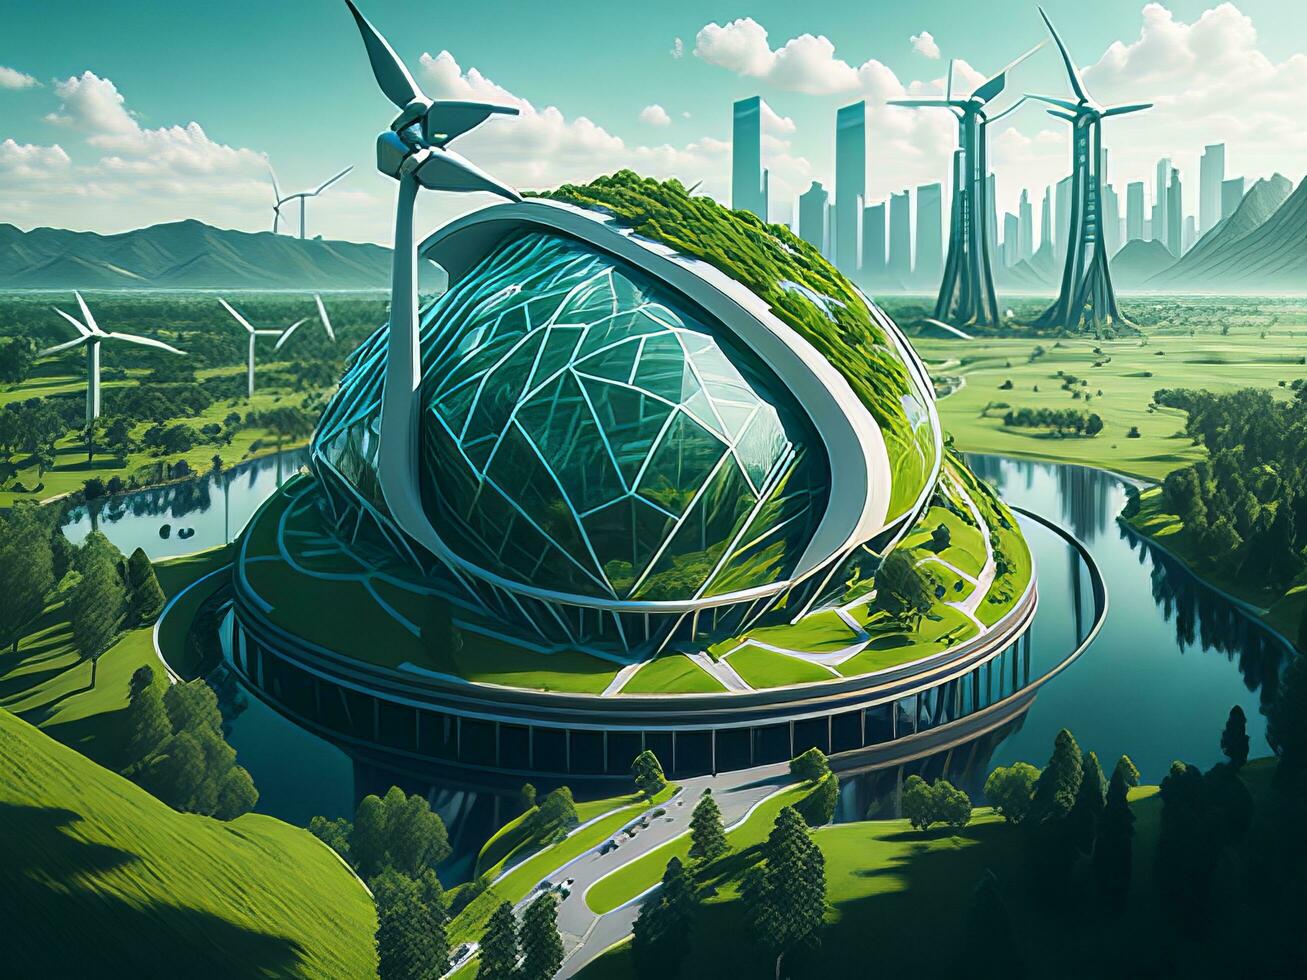 A utopian future where renewable energy sources power a sustainable world with lush green landscapes photo